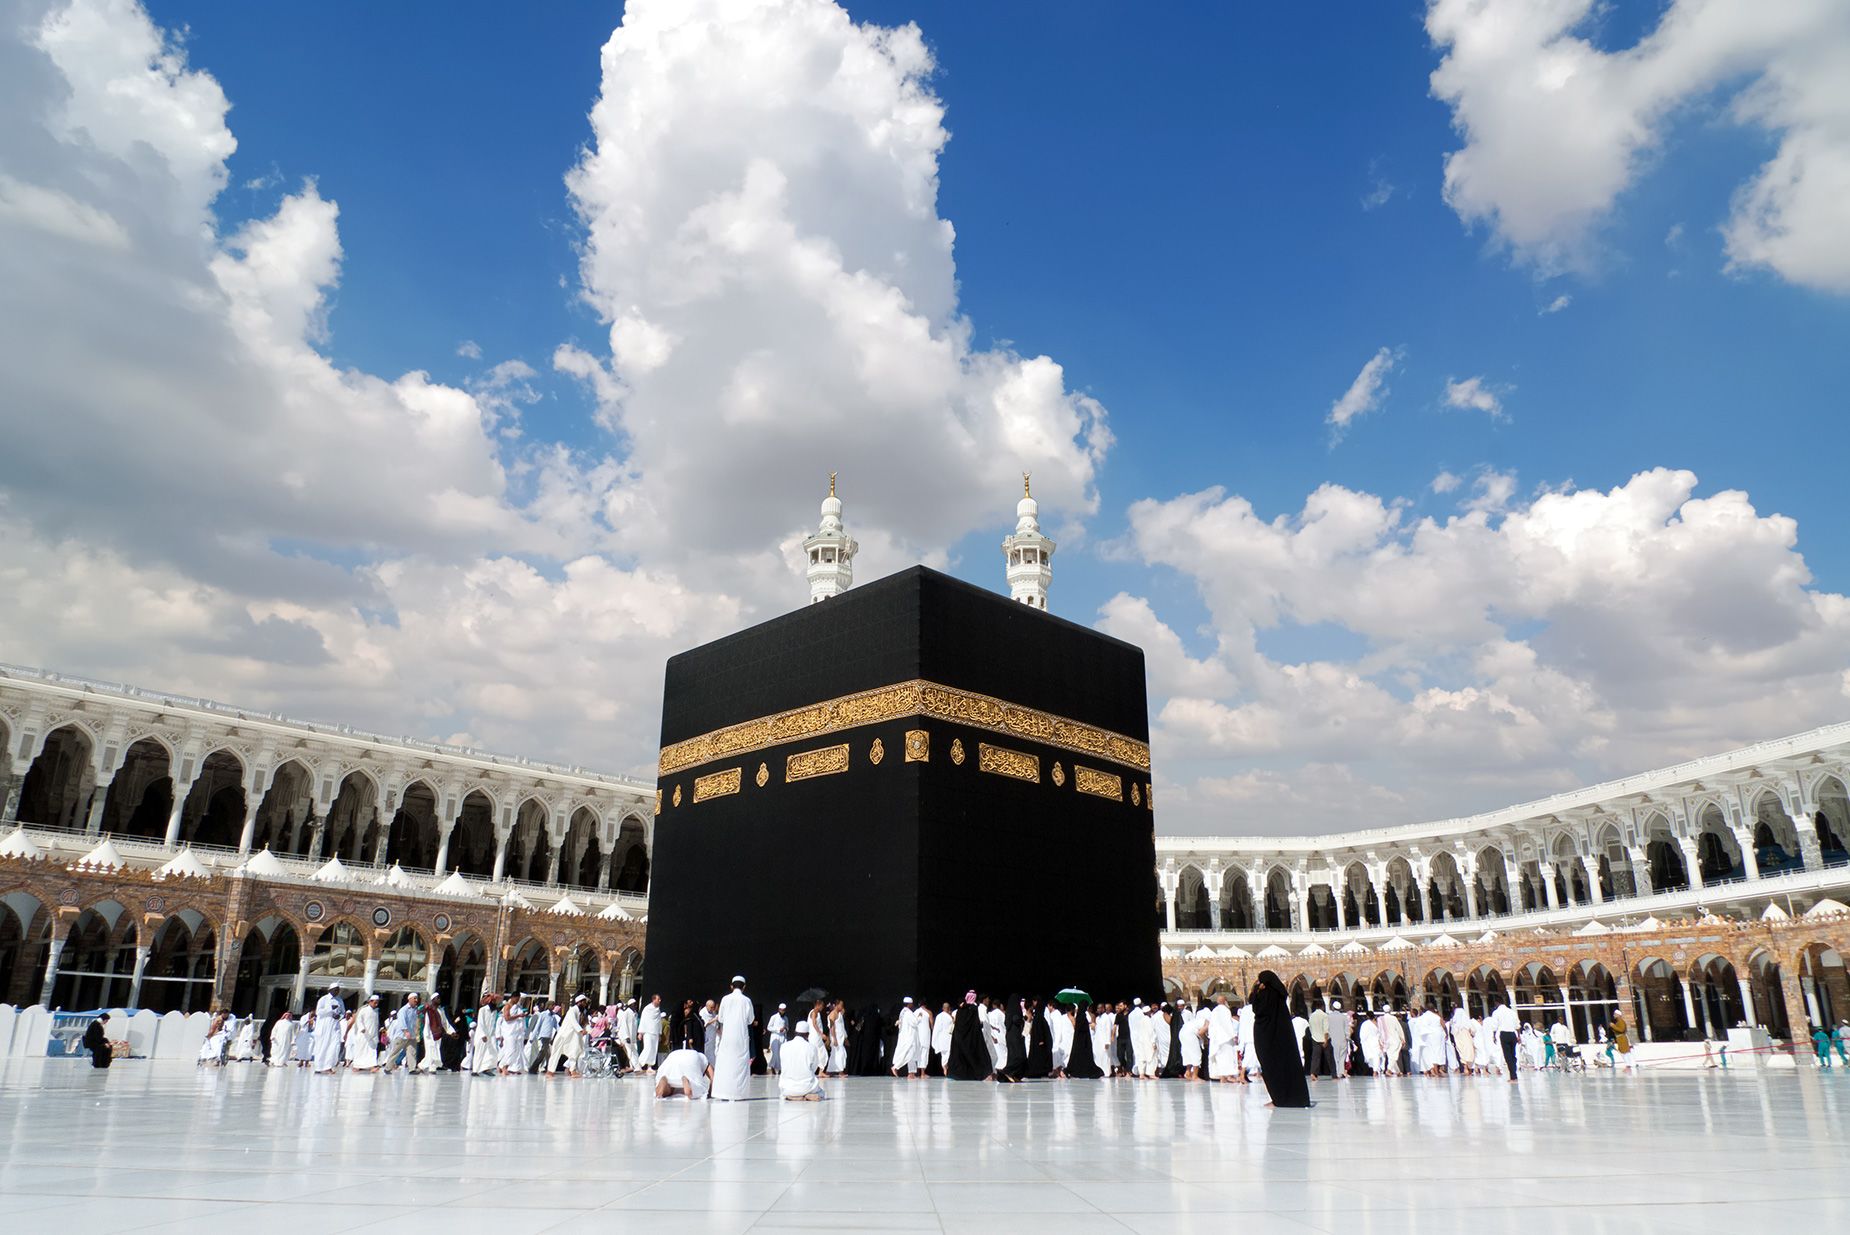 The Kaaba, in Mecca, is Islam's holiest site